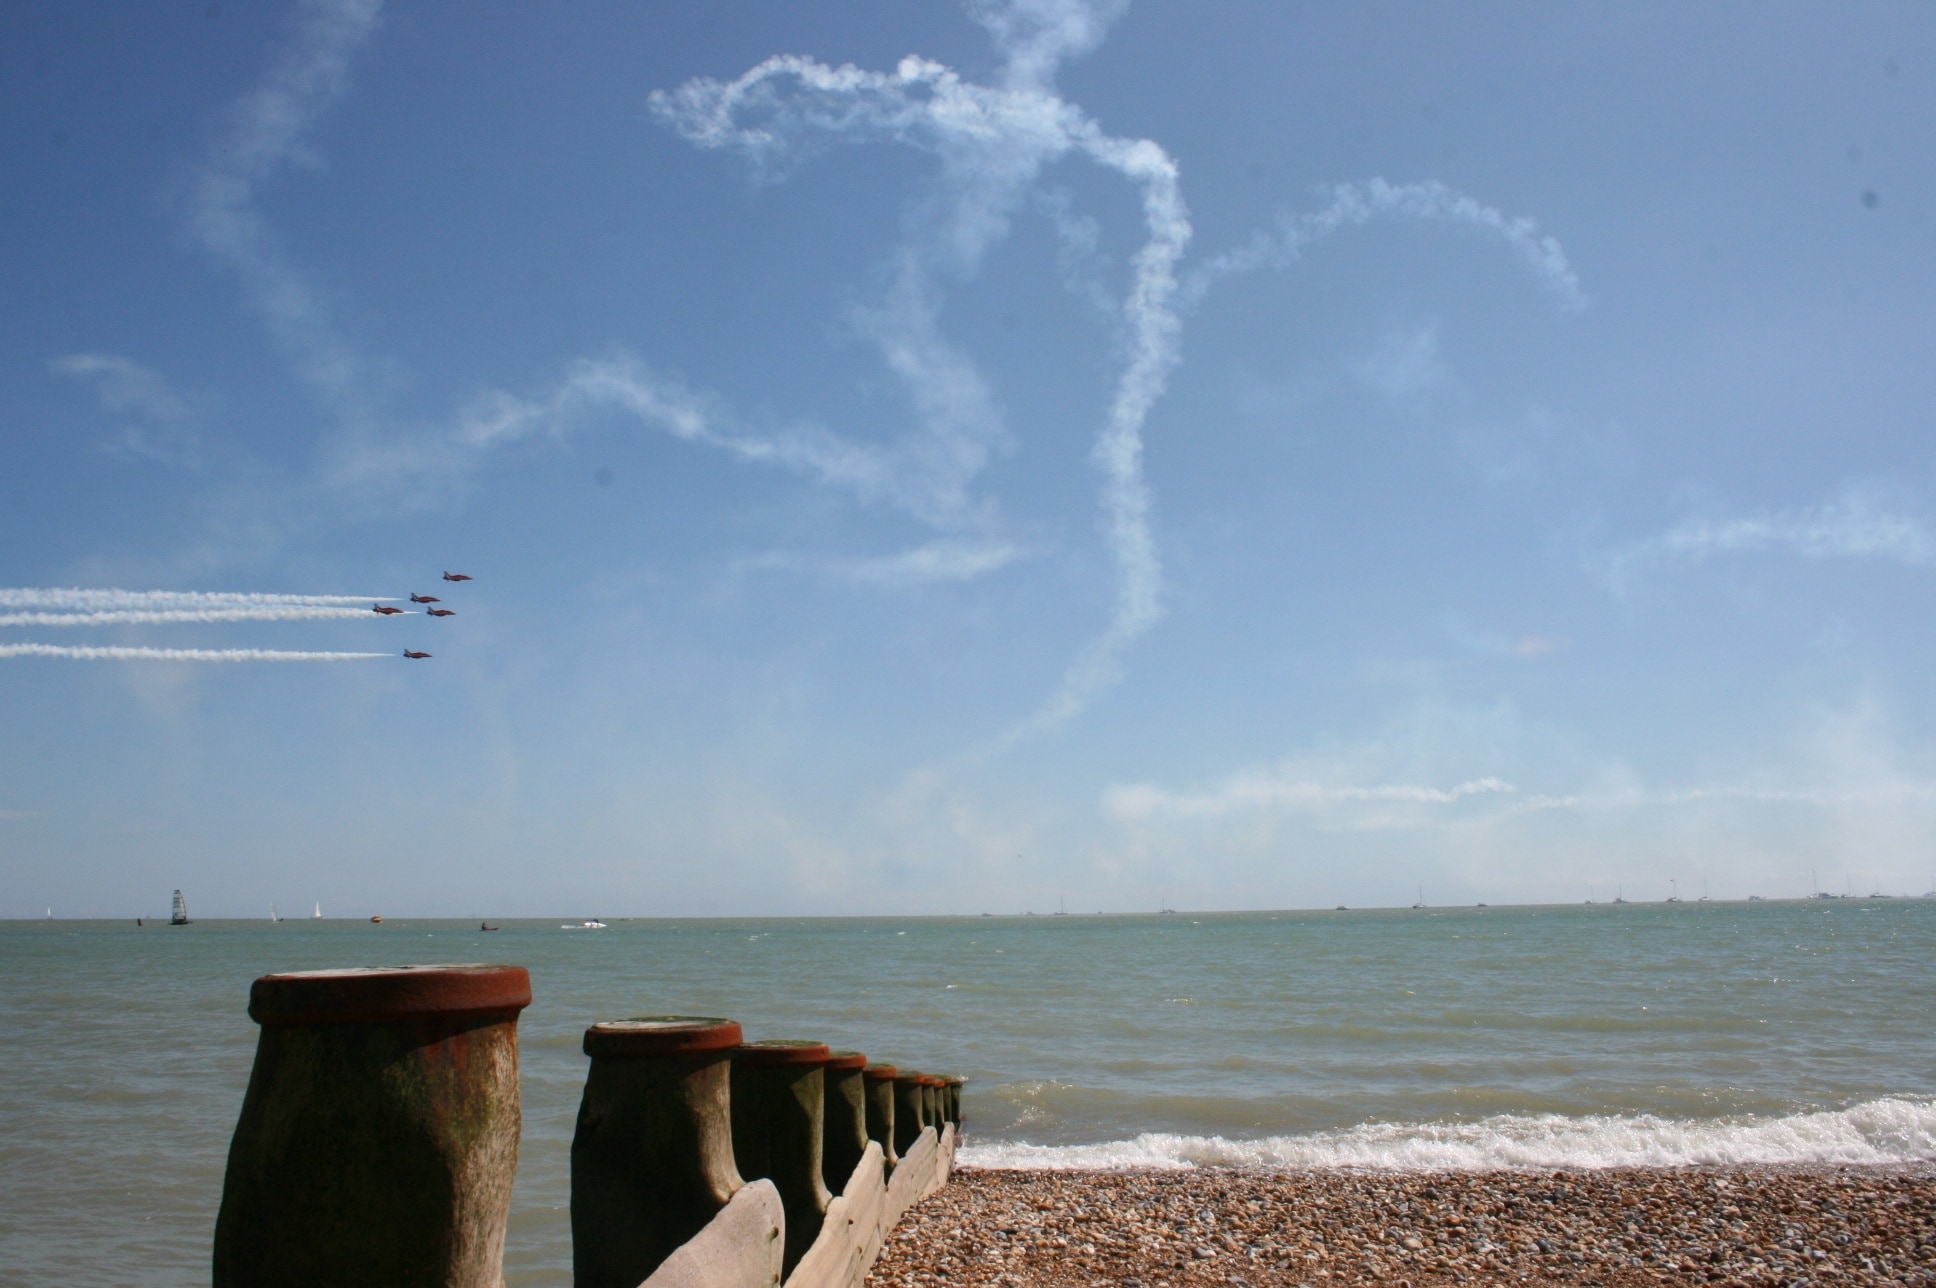 five jetplane with contrails performing near body of water during daytime